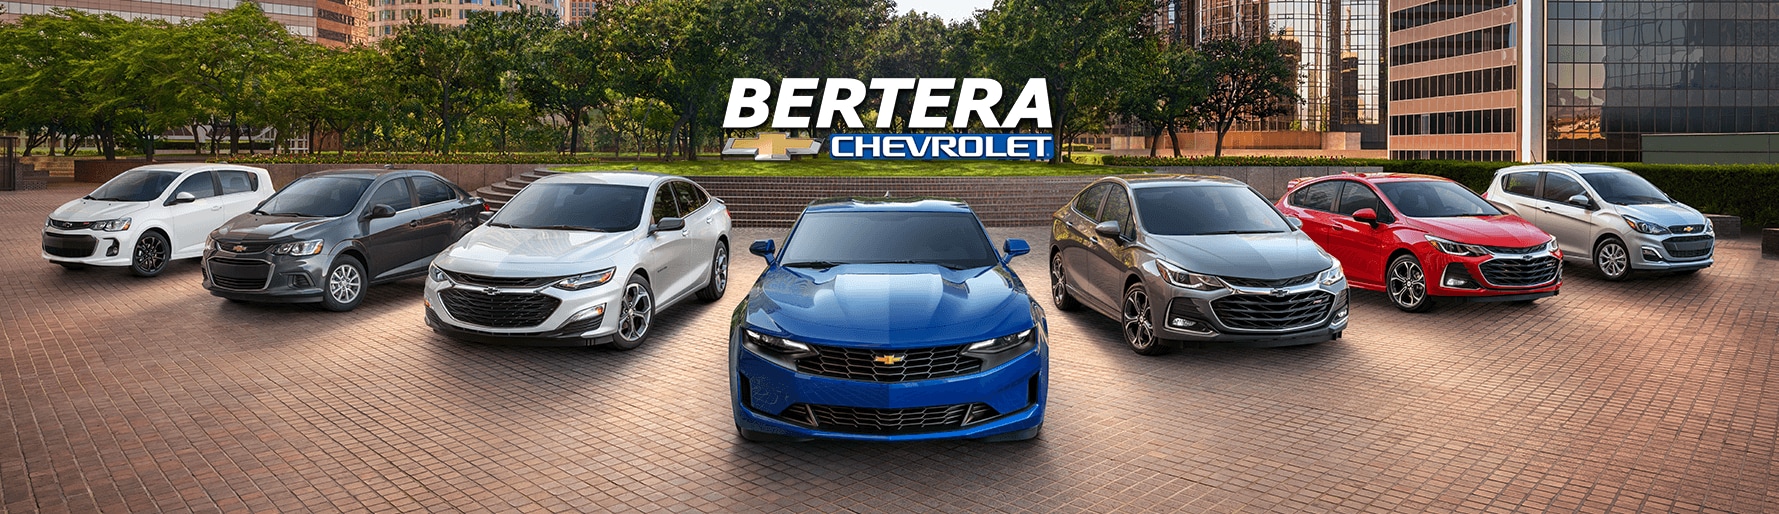 Bertera Auto Dealer Group | Over 40 Years of Serving New England